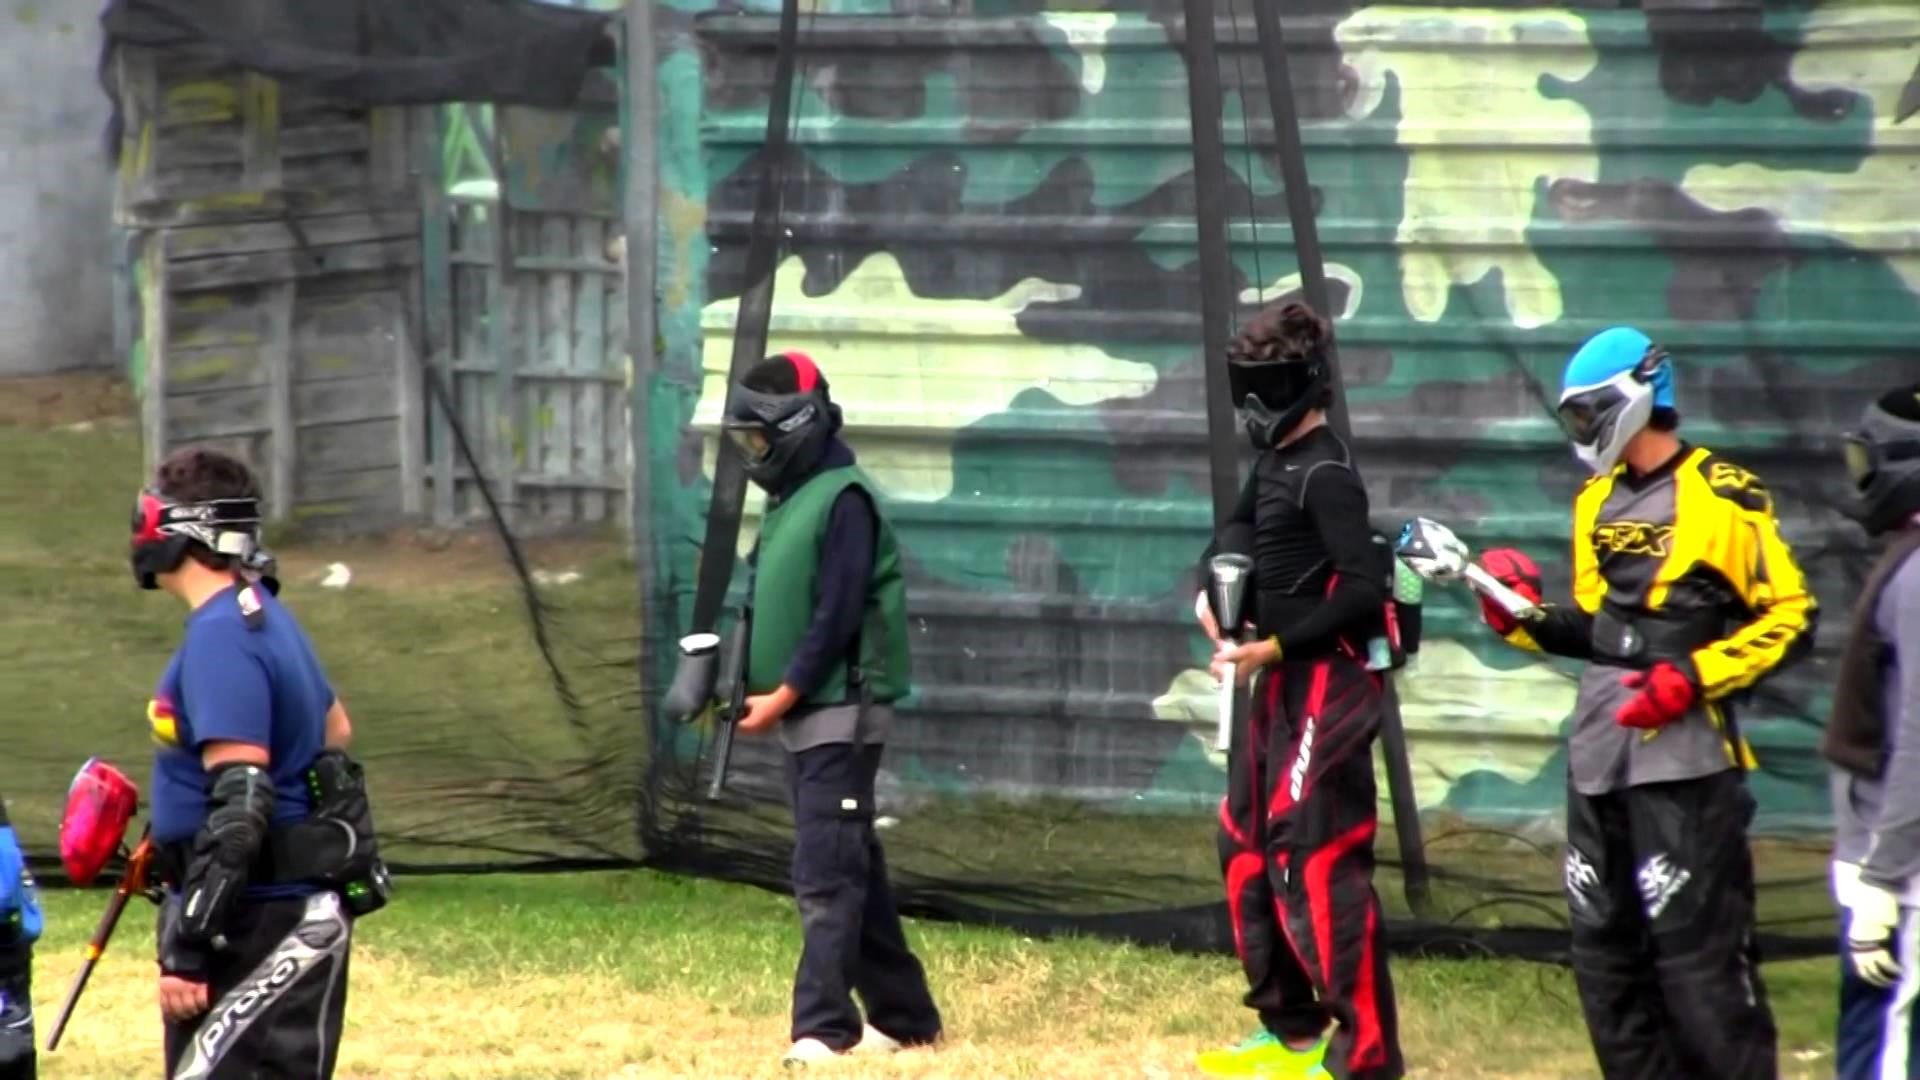 Practice paintball with team members